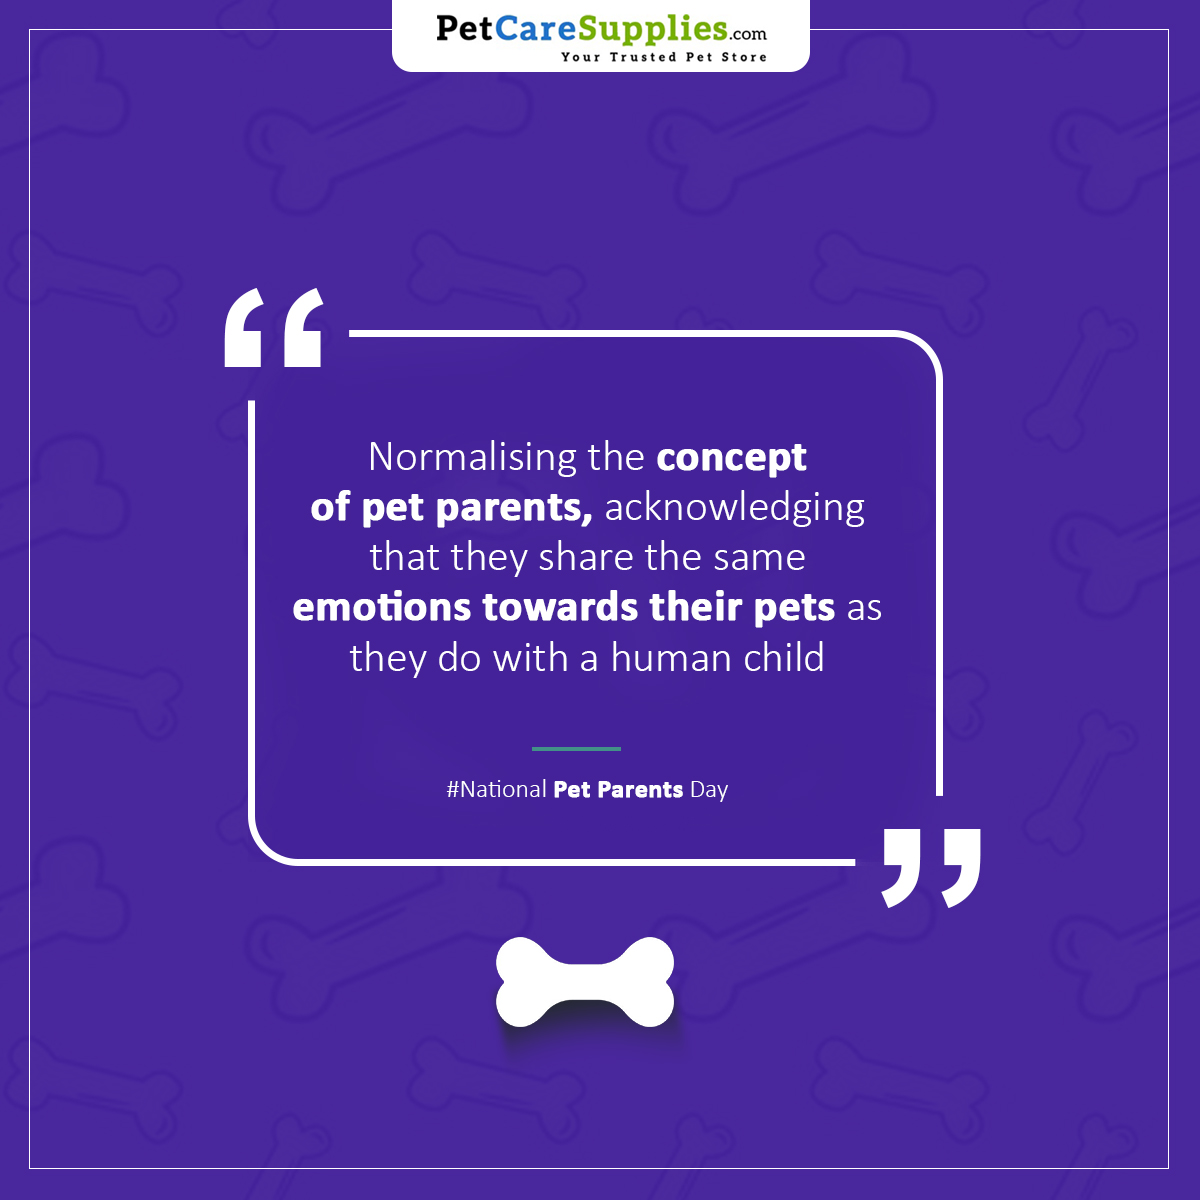 '🐾 Celebrate the unconditional love of our furry friends this National Pet Parents Day! Share a pic of your beloved pet and tag us to spread the joy. Let's show the world why our pets are family! ❤️

#nationalpetparentsday #furfamily #loveyourpet #petcaresupplies #petcare